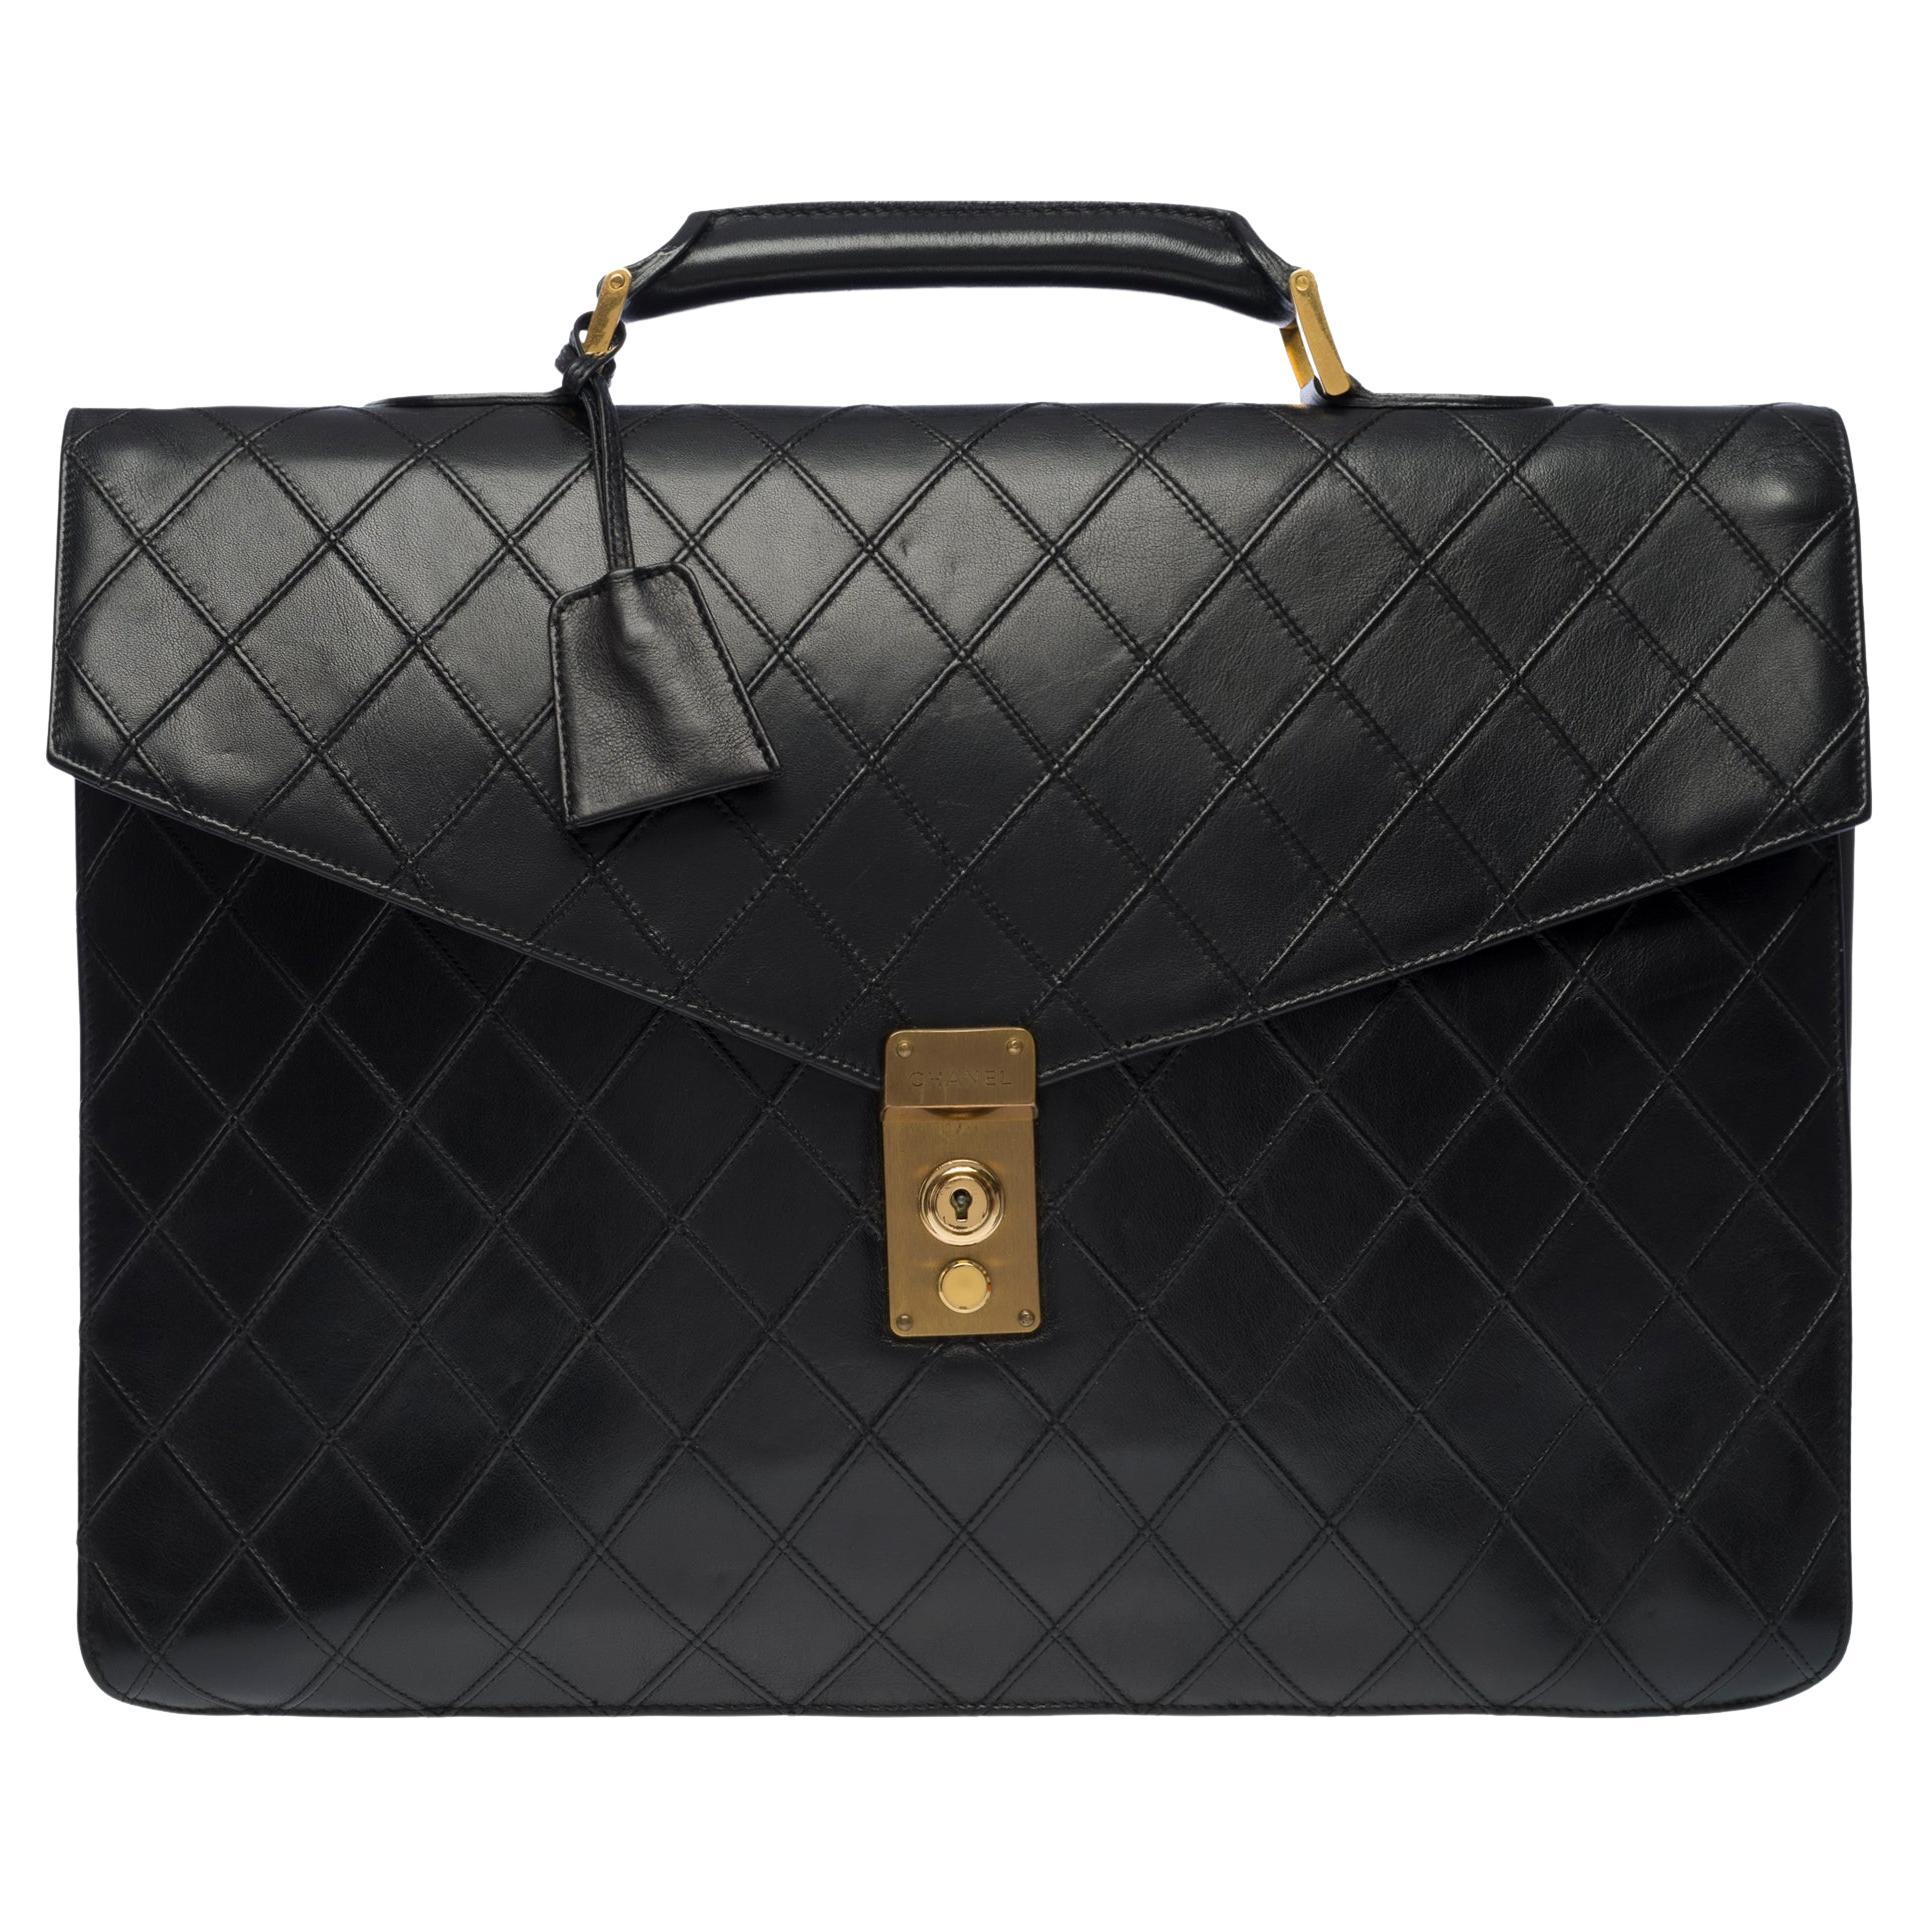 Classy Chanel vintage Briefcase in black quilted lambskin leather, GHW